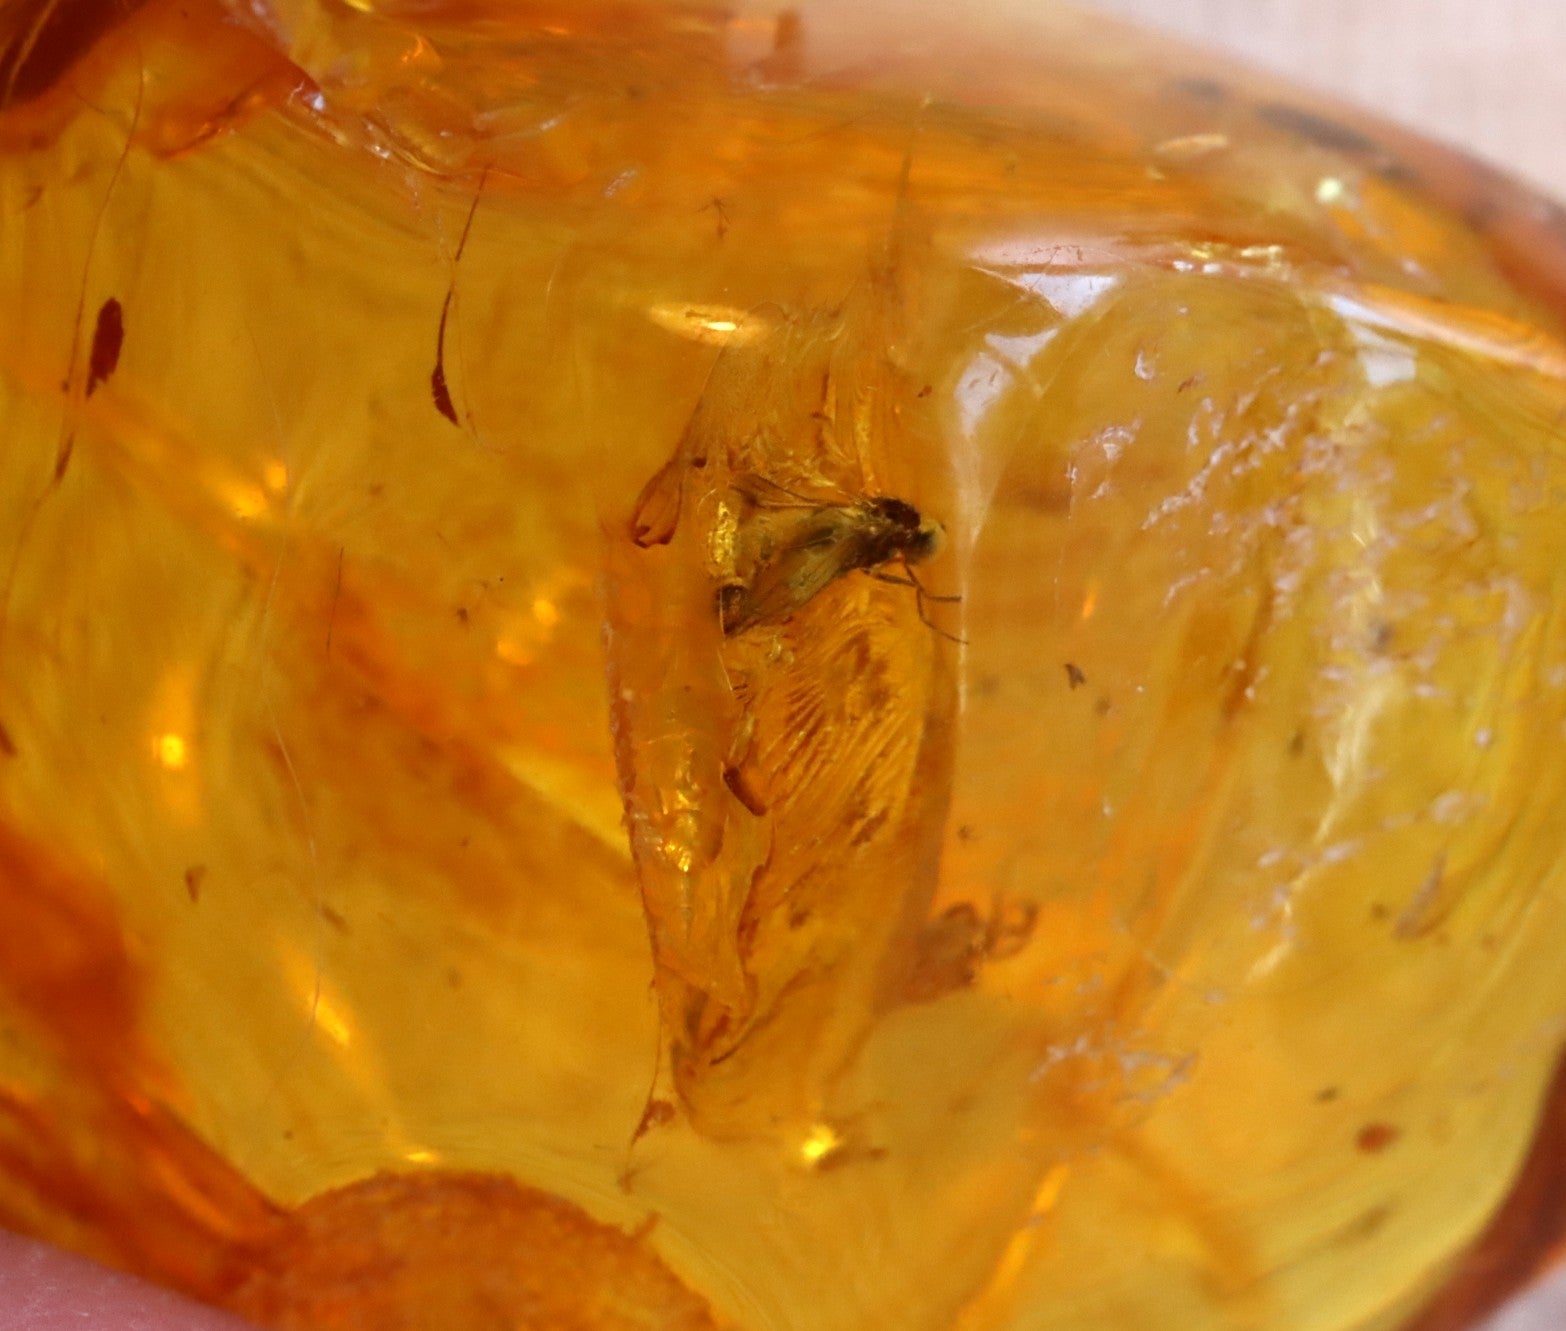 40 Million year Old Baltic Amber with Insect Inclusion.